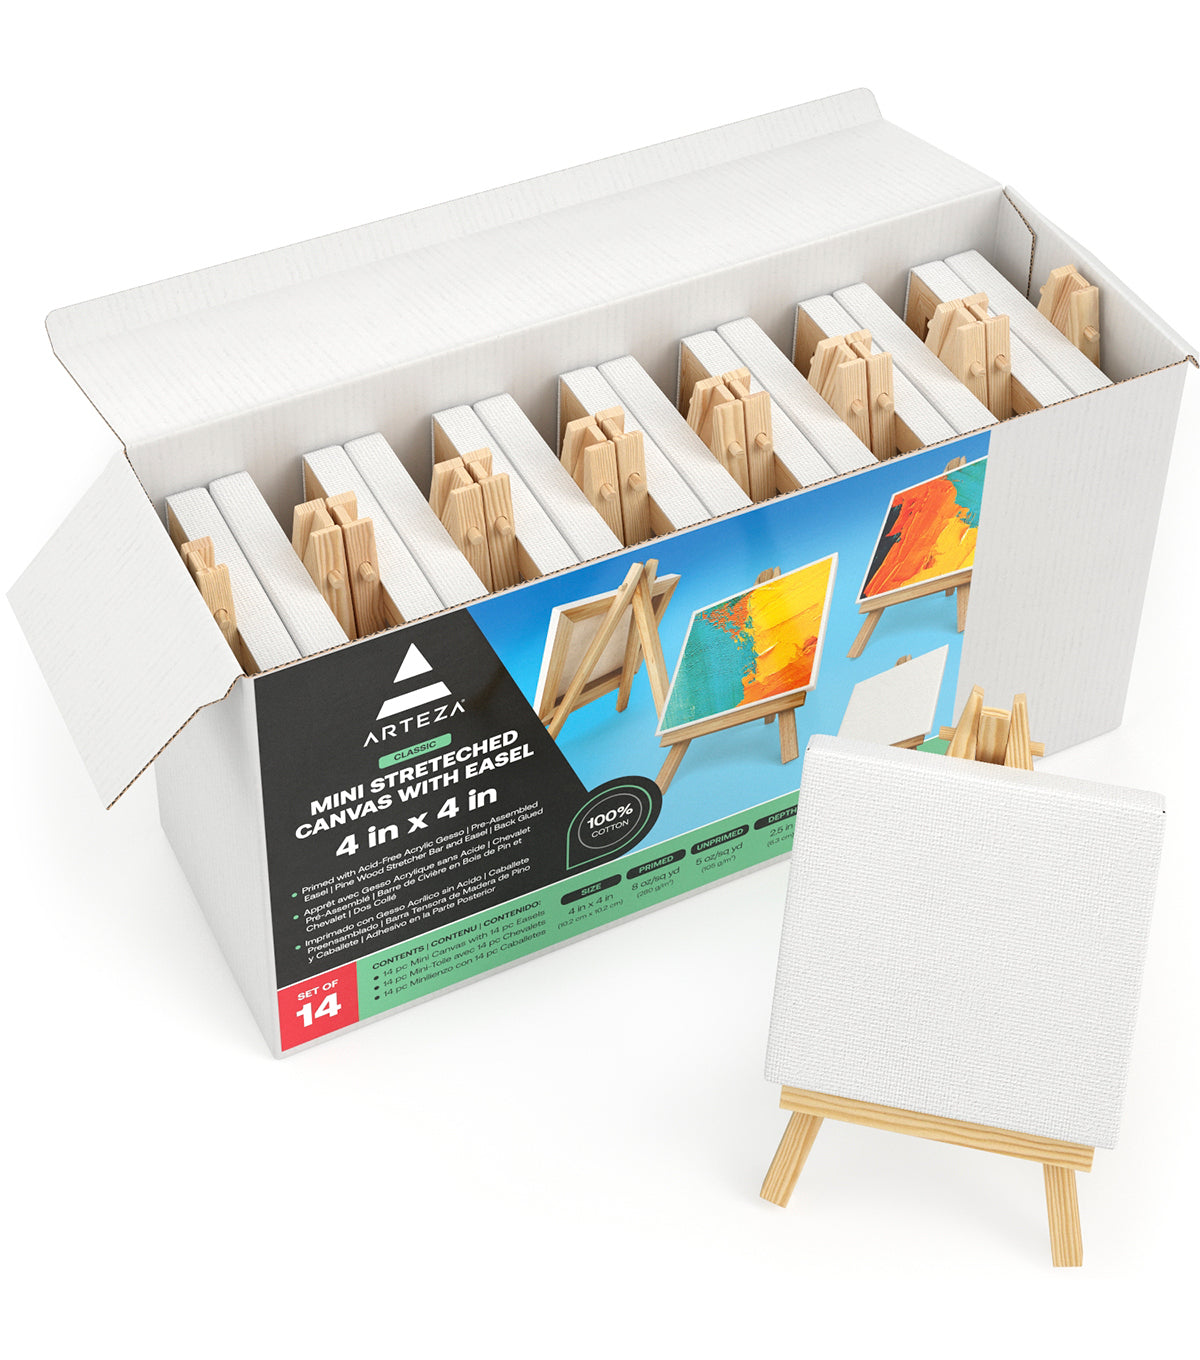 Mini Stretched Canvas, 4 x 4 - Pack of 14